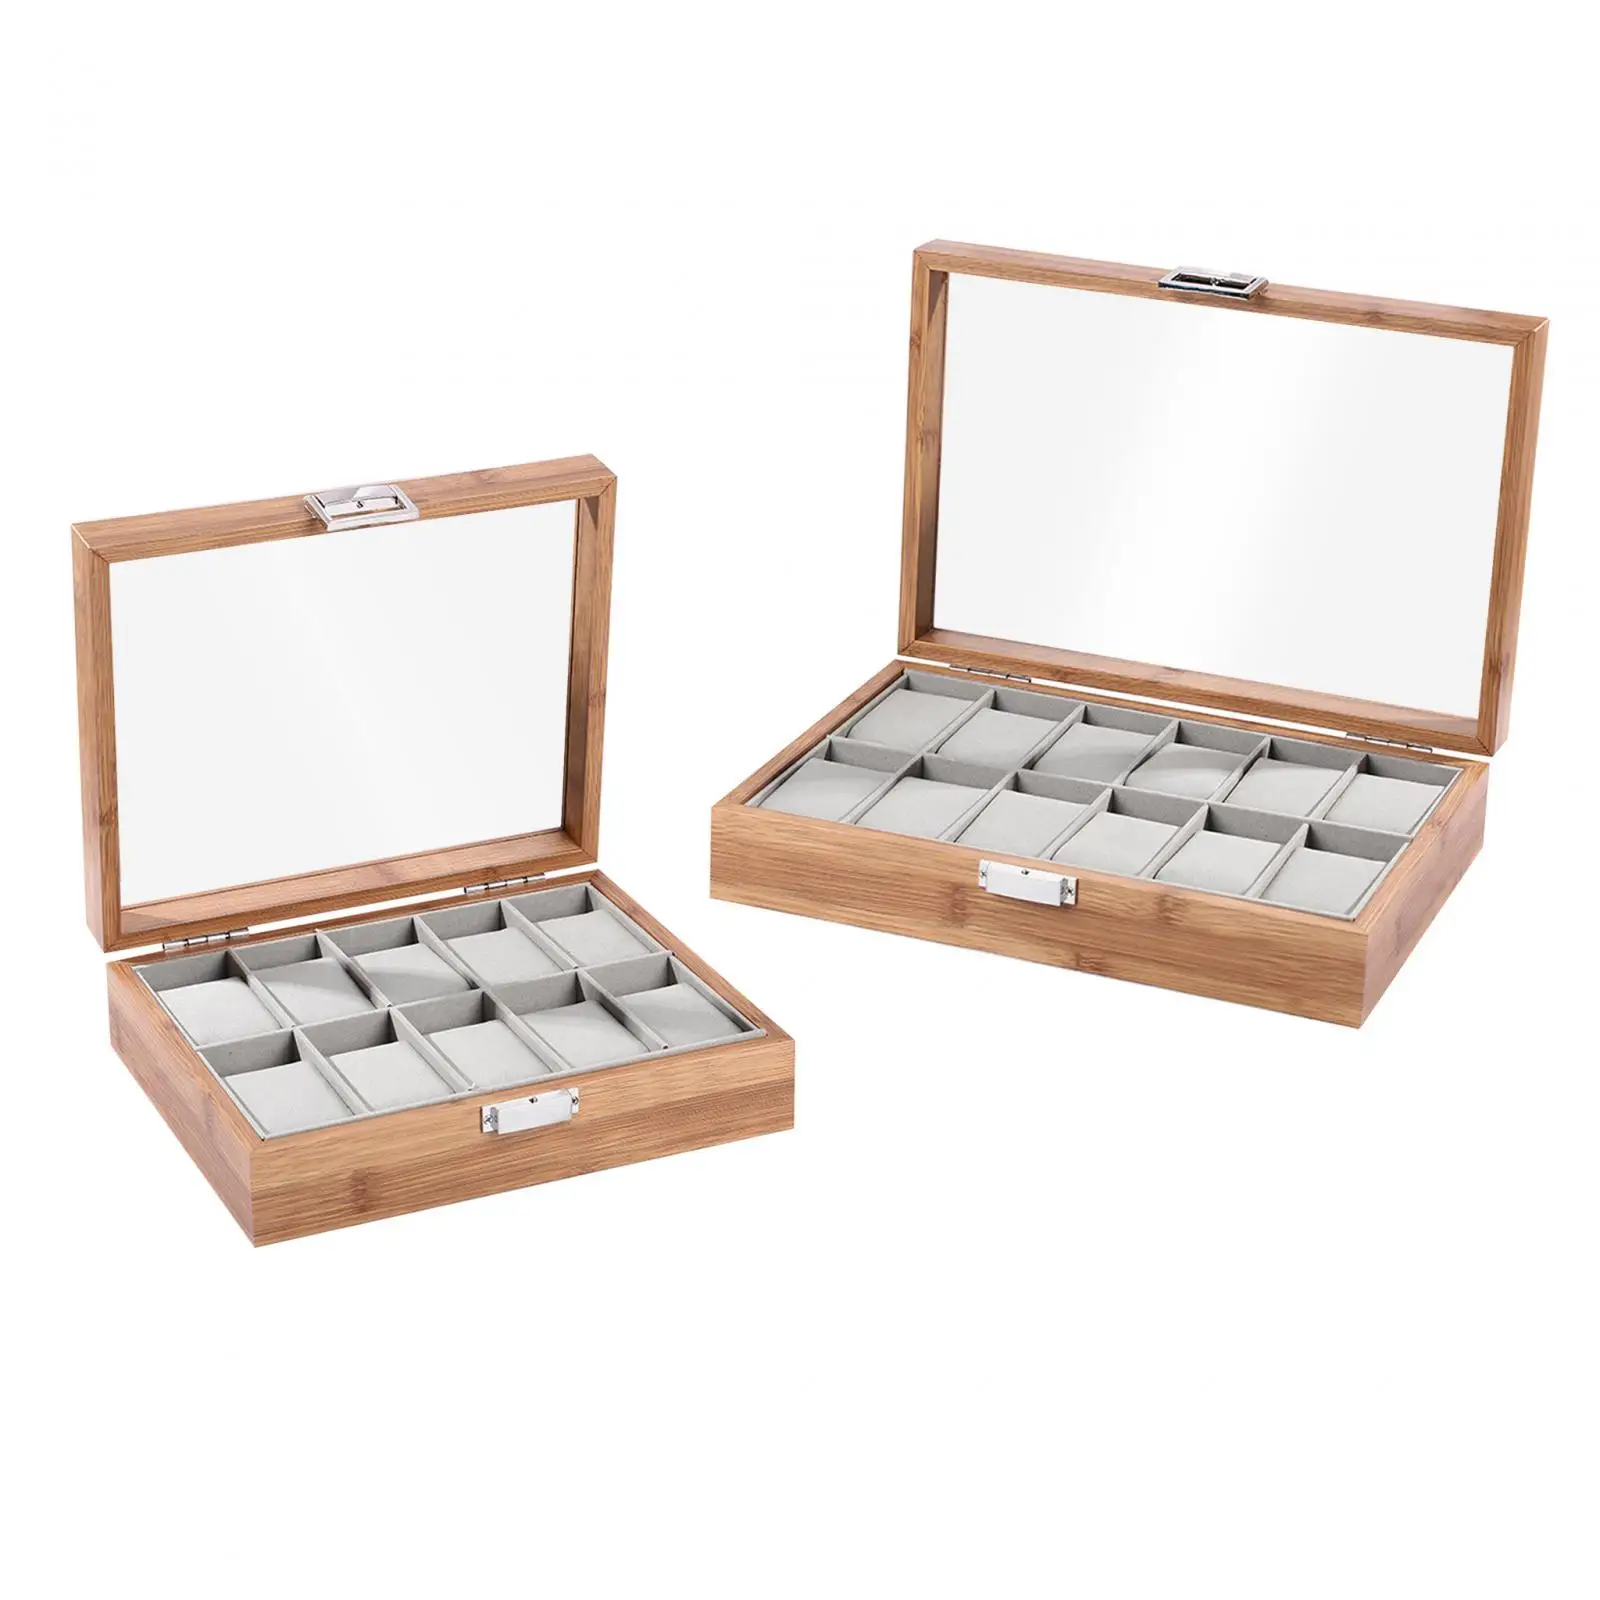 Watch Storage Box Wooden Watches Box Jewelry Display Case for Men and Women Watches Necklace Bracelet Earrings Home Decoration